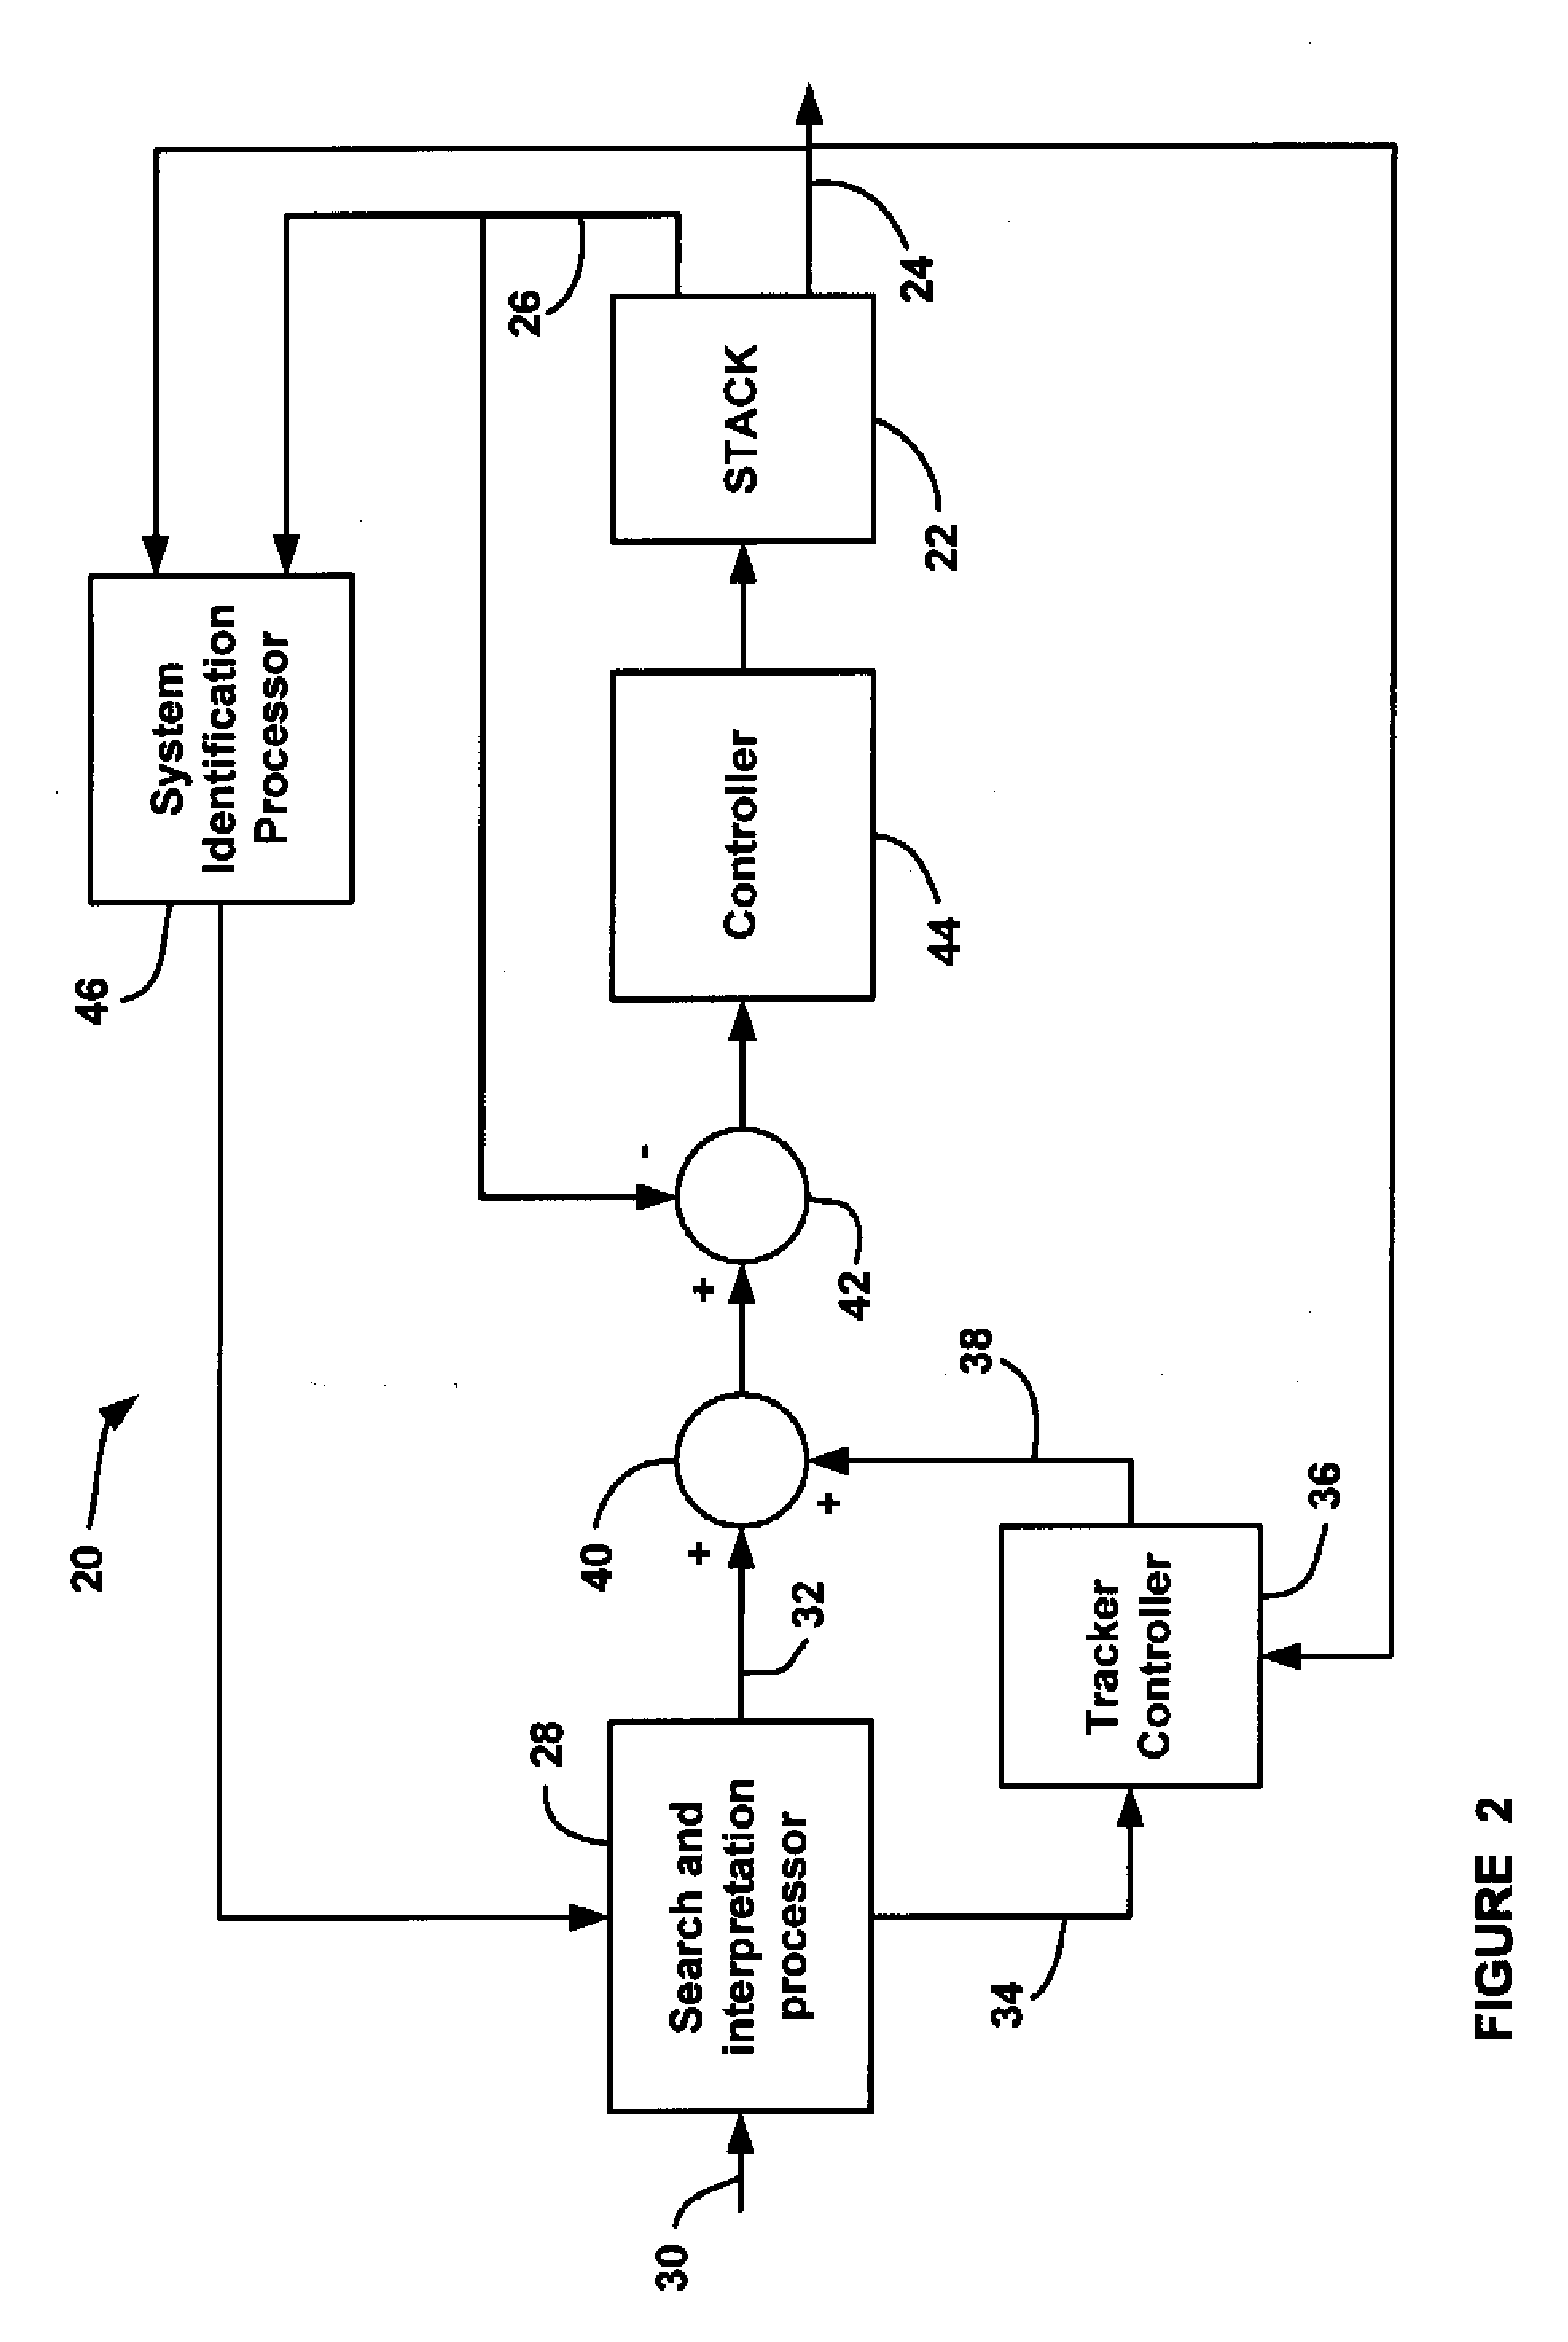 Algorithm for Stack Current Controller Based on Polarization Curve Estimation of a Fuel Cell Stack